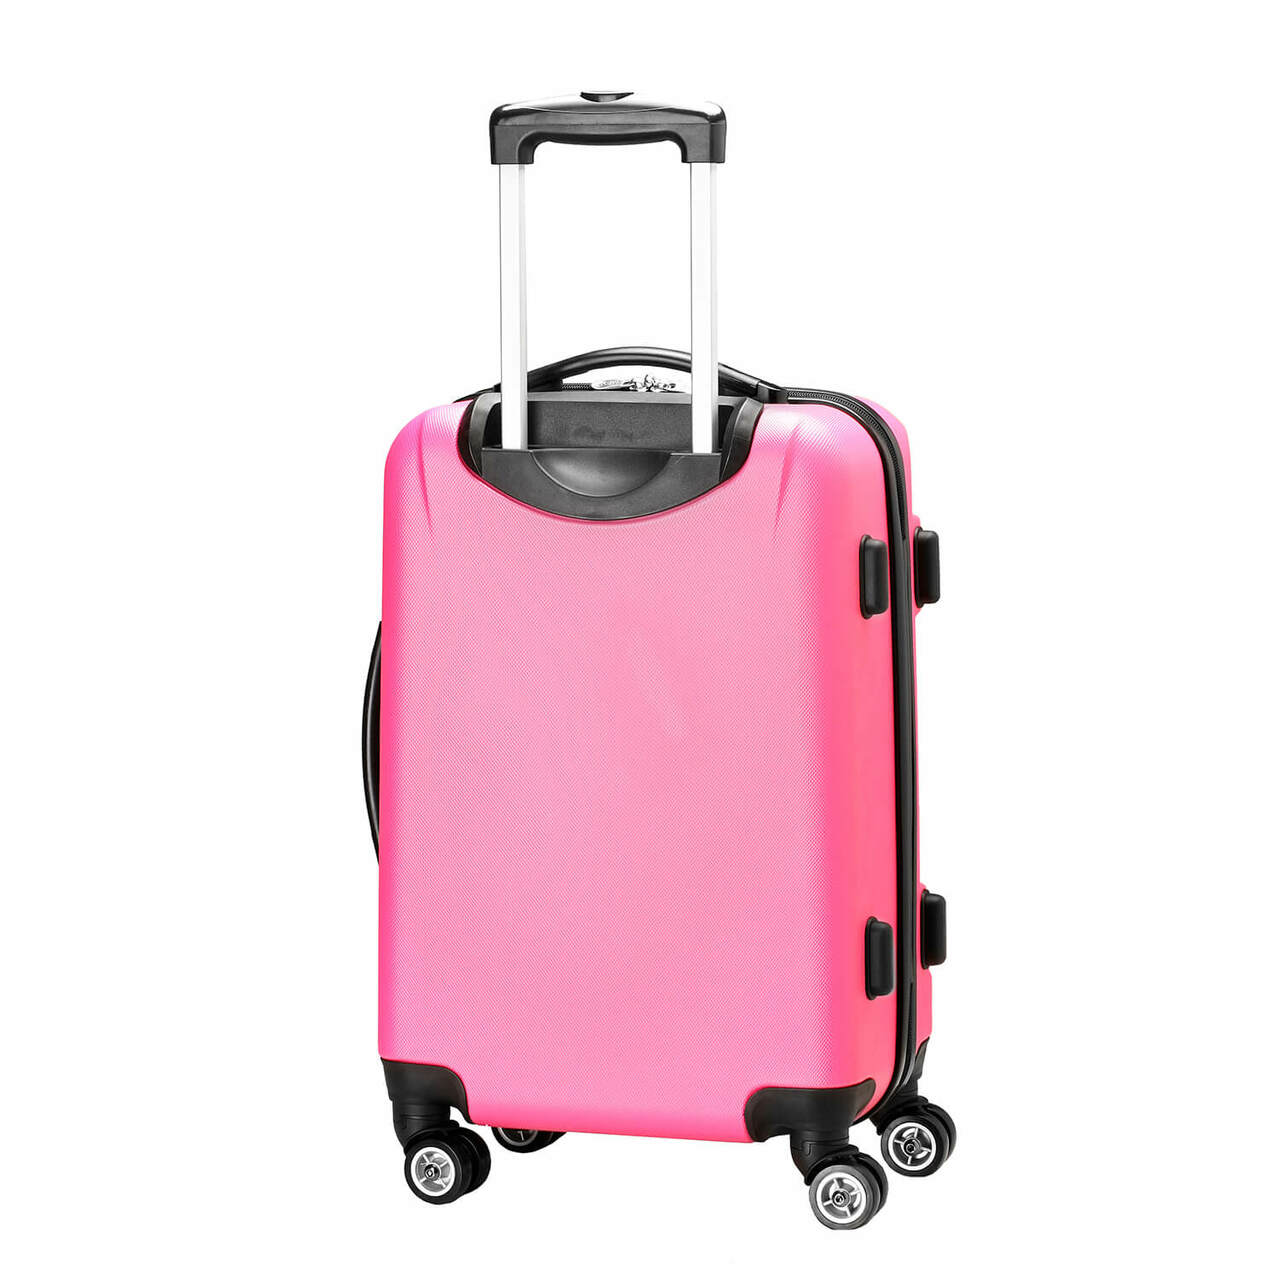 New Orleans Pelicans 20" Pink Domestic Carry-on Spinner